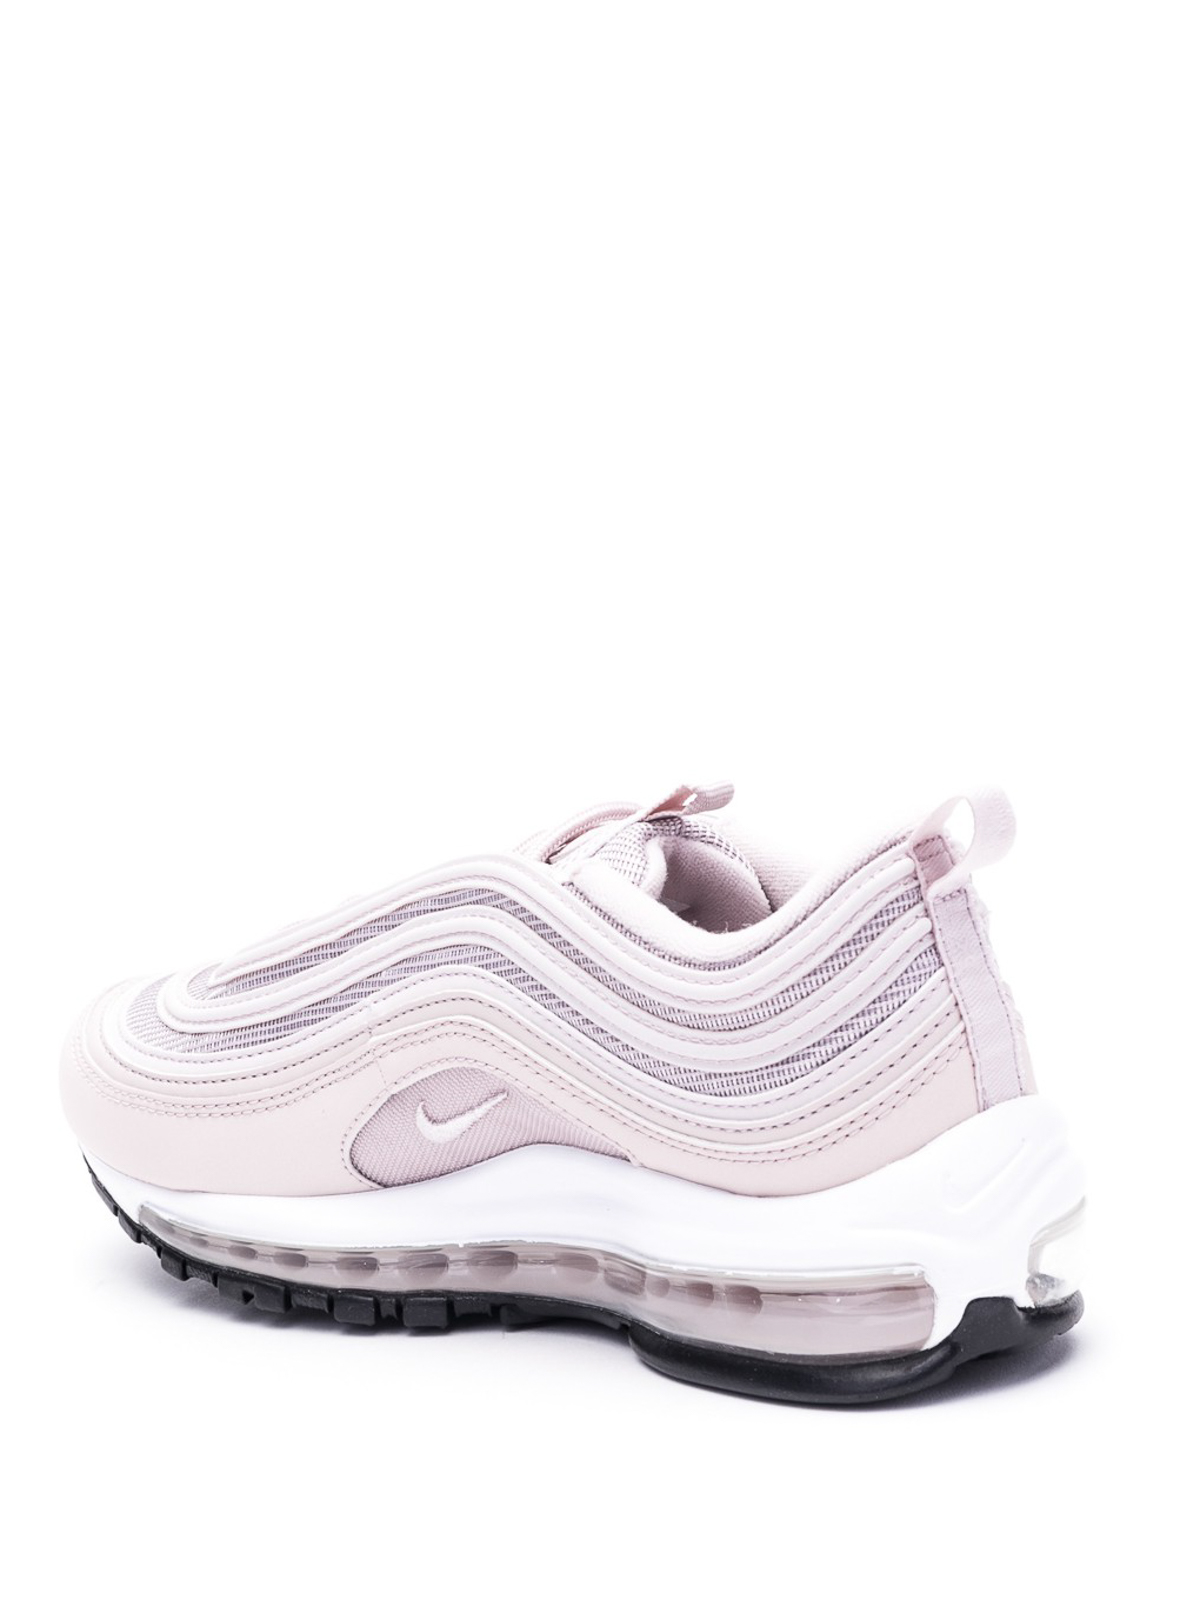 Nike - Air Max 97 sneakers - trainers 